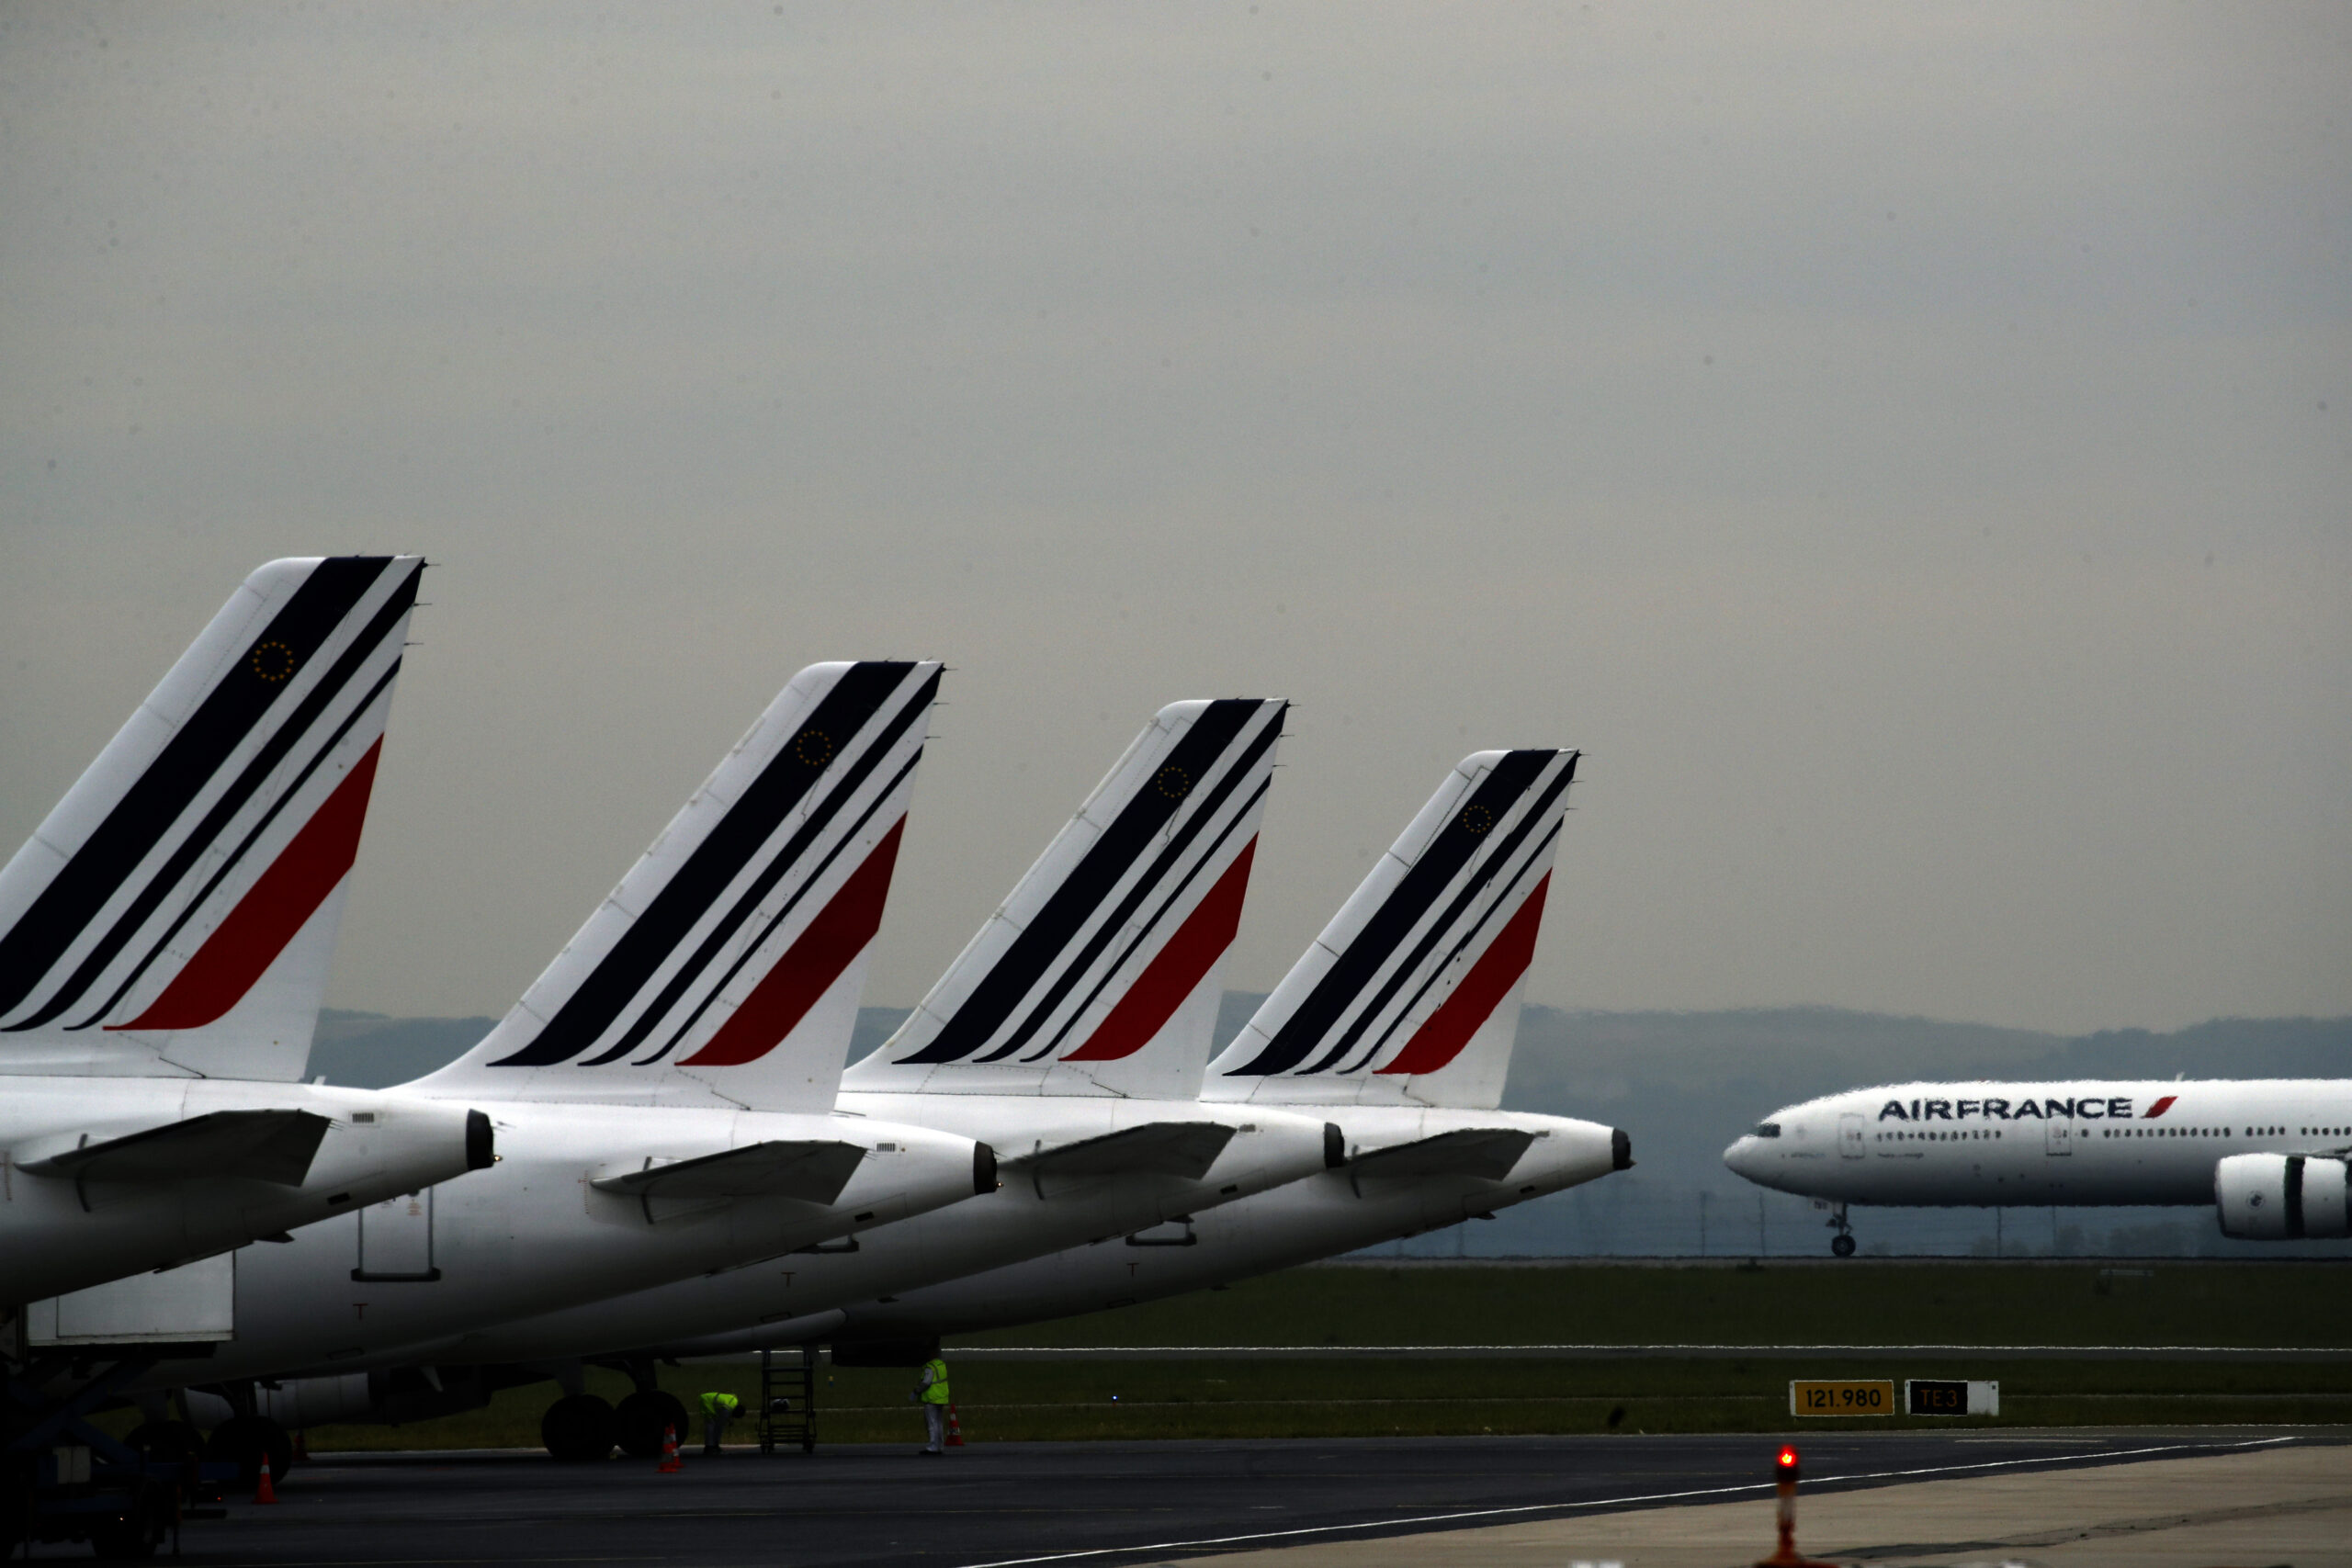 FILE - Air France planes are parked on the tarmac at Paris Charles de Gaulle airport, in Roissy, near Paris, May 17, 2019. Air France pilots are under scrutiny after recent incidents that have prompted French investigators to call for tougher safety protocols. An airline official said two Air France pilots were suspended after physically fighting in the cockpit on a Geneva-Paris flight in June, 2022. (AP Photo/Christophe Ena, File)